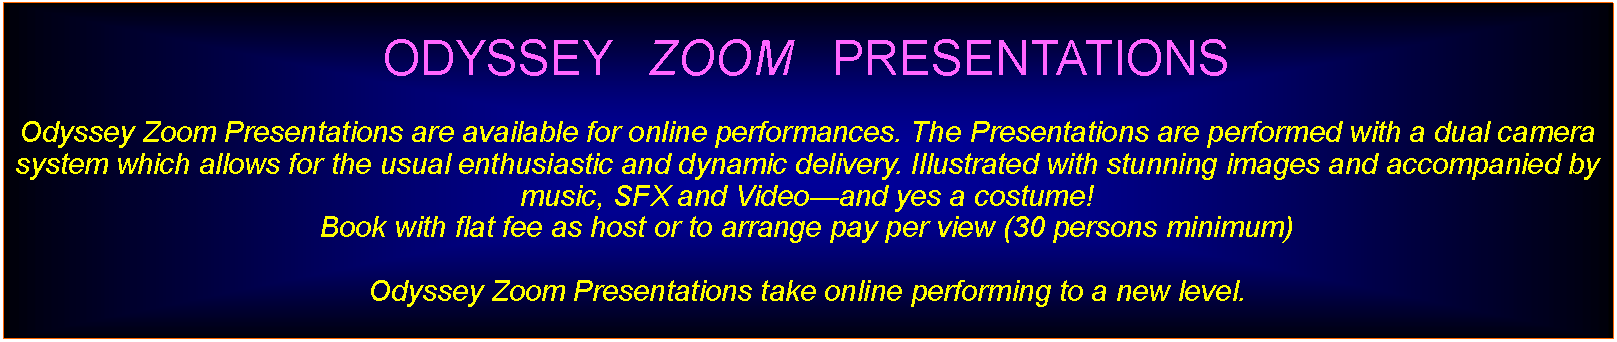 Text Box: ODYSSEY   ZOOM   PRESENTATIONS Odyssey Zoom Presentations are available for online performances. The Presentations are performed with a dual camera system which allows for the usual enthusiastic and dynamic delivery. Illustrated with stunning images and accompanied by  music, SFX and Videoand yes a costume!Book with flat fee as host or to arrange pay per view (30 persons minimum)Odyssey Zoom Presentations take online performing to a new level.